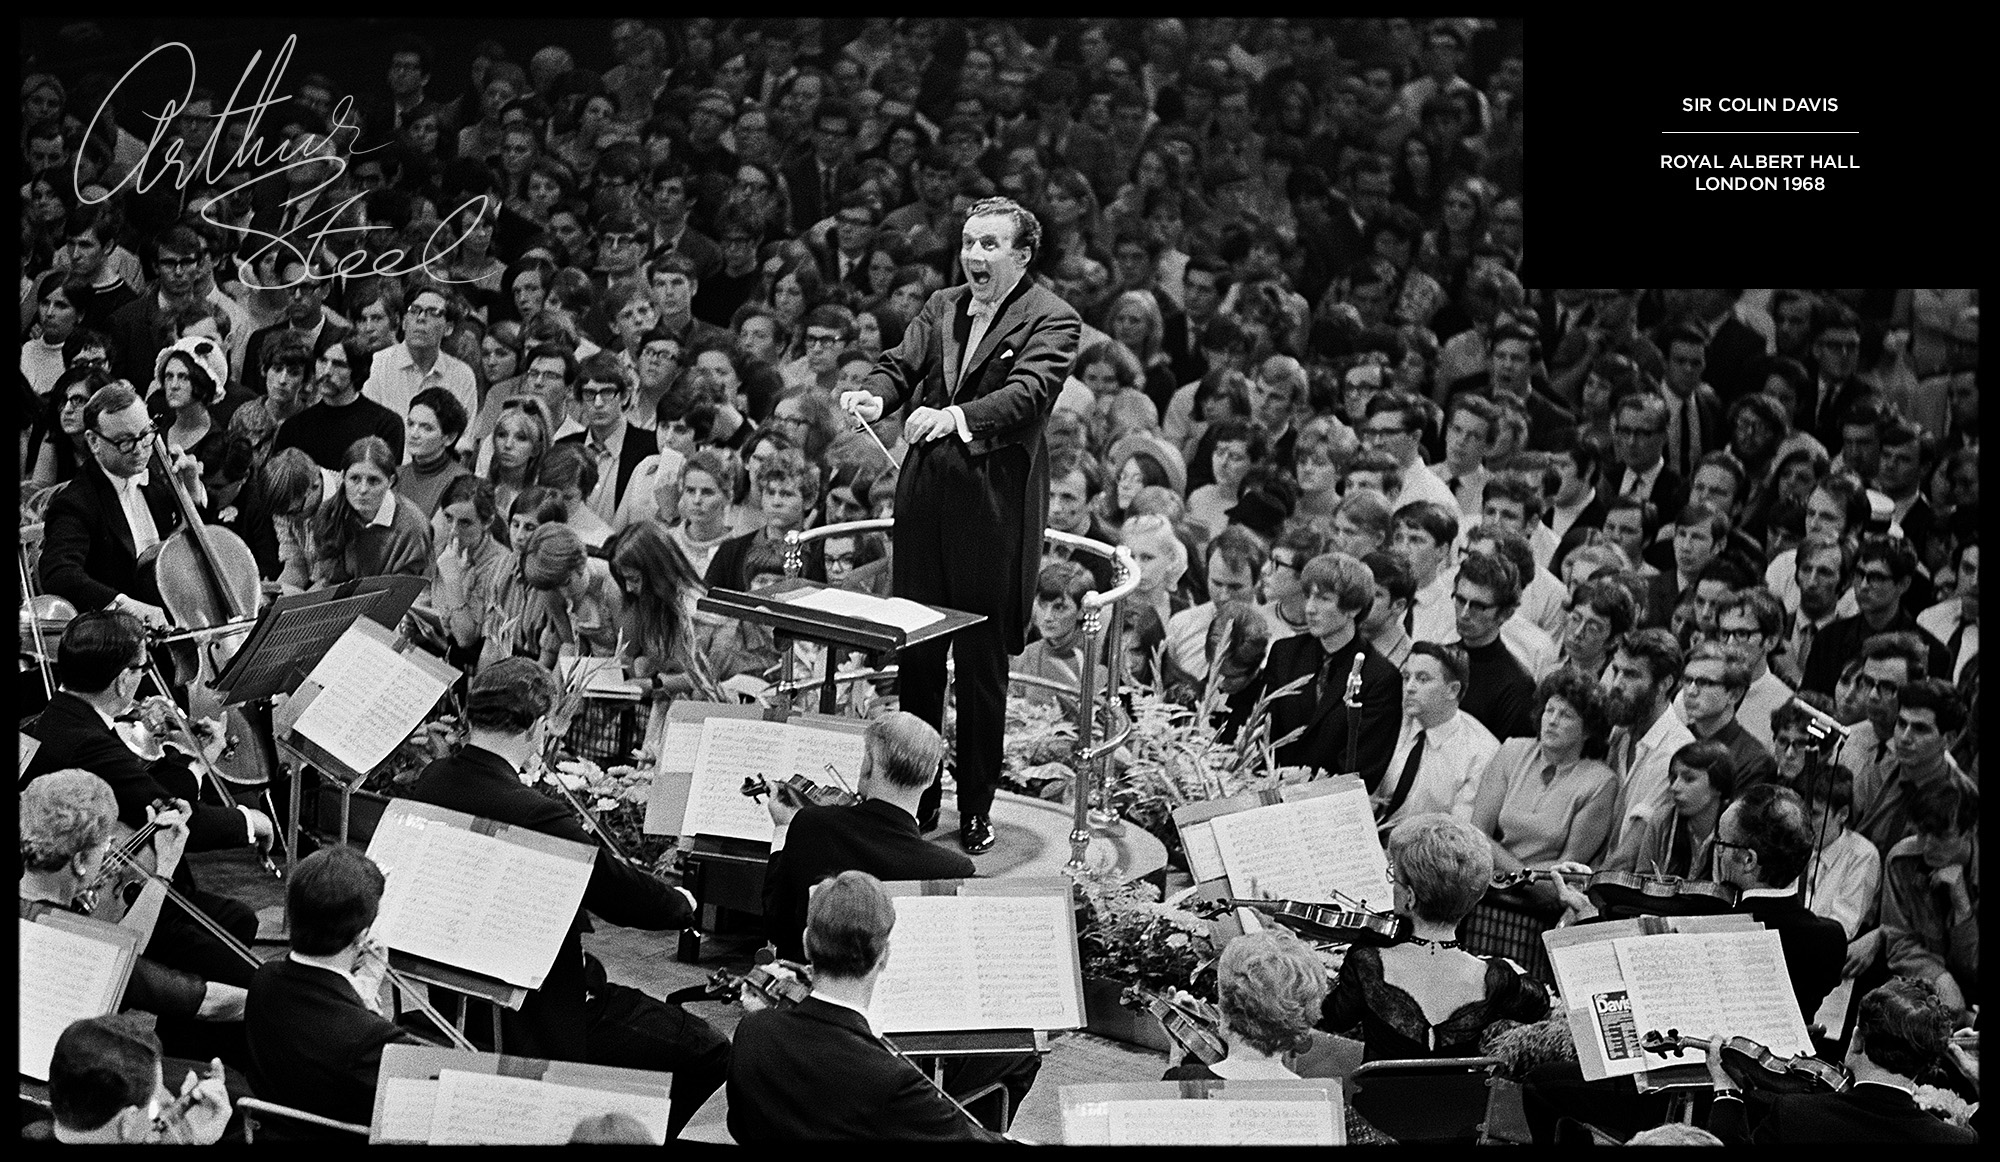 an exclusive limited edition photograph of the conductor sir colin davis at the royal albert hall by photographer arthur steel